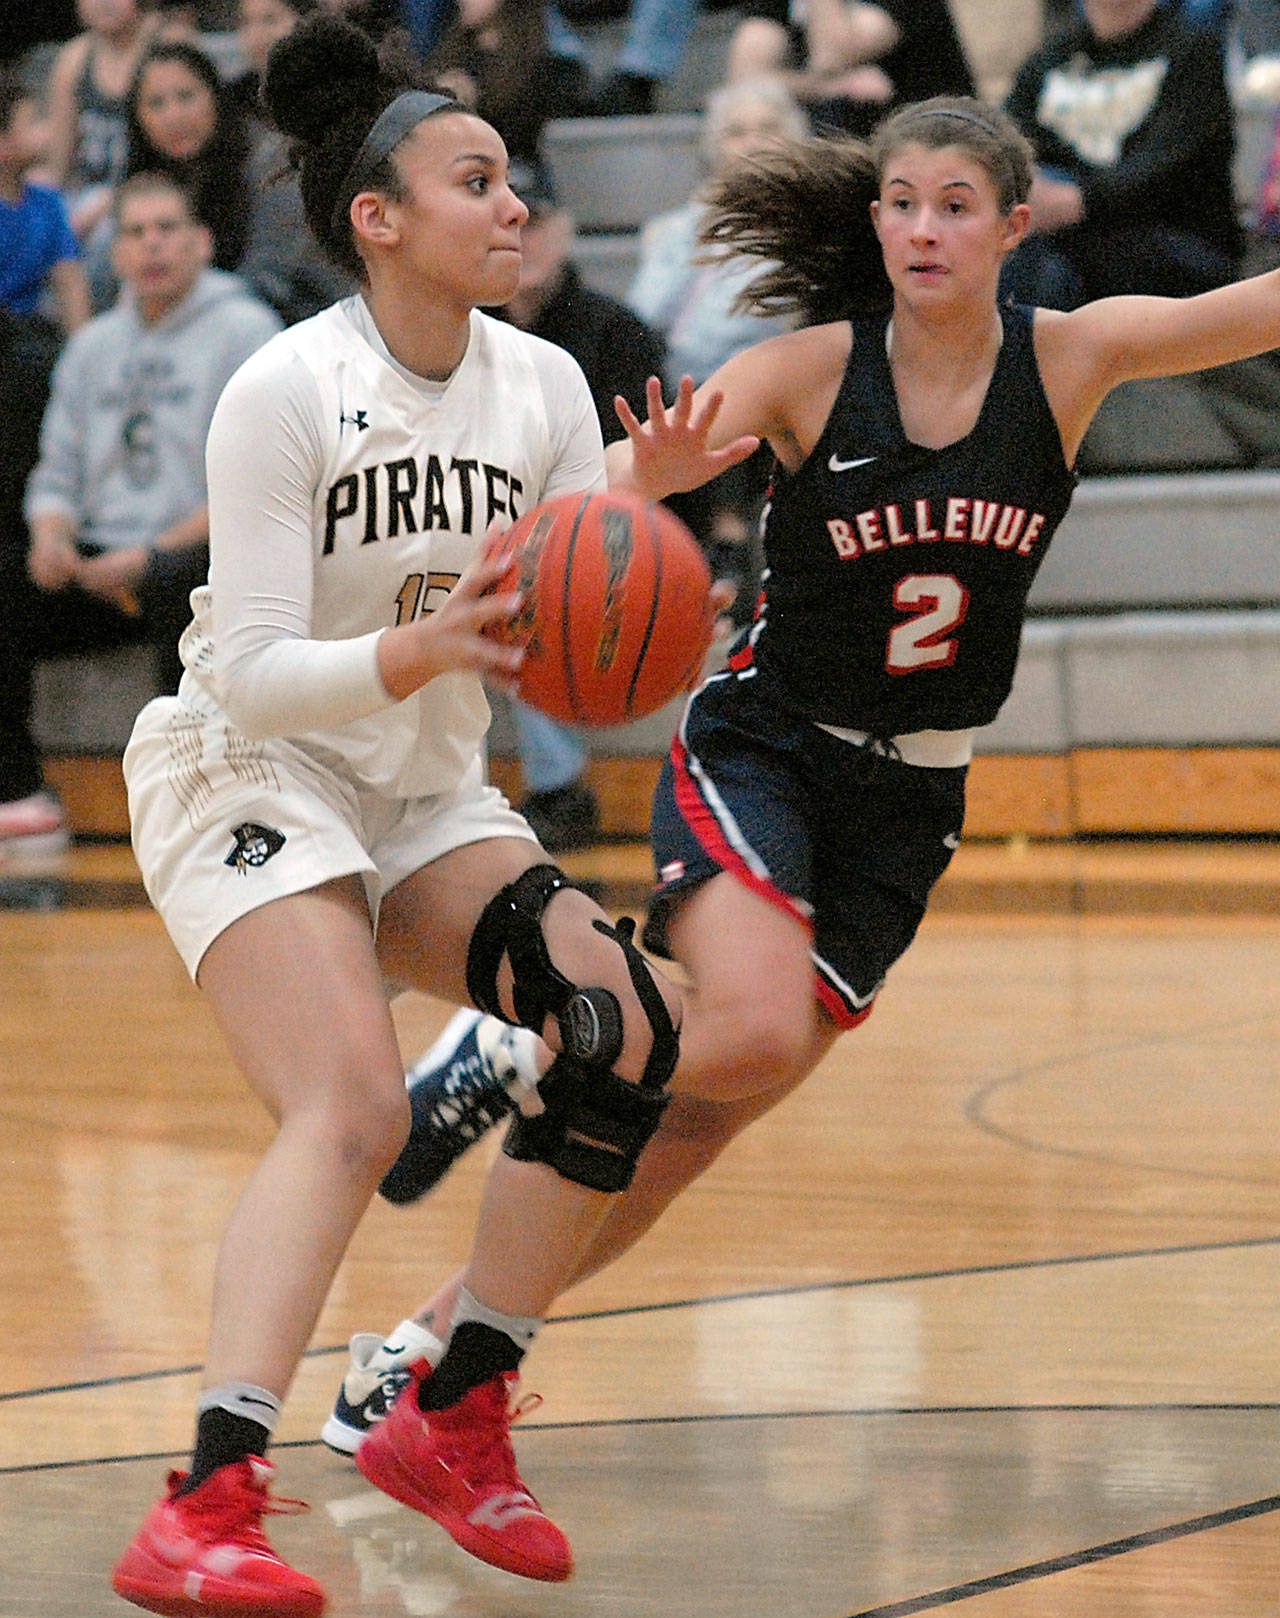 Peninsula’s Casandra White, left, slips past Bellevue’s Rokki Brown during a game in February. White has signed to continue her career at NCAA Division II Western Oregon University. (Keith Thorpe/Peninsula Daily News file)